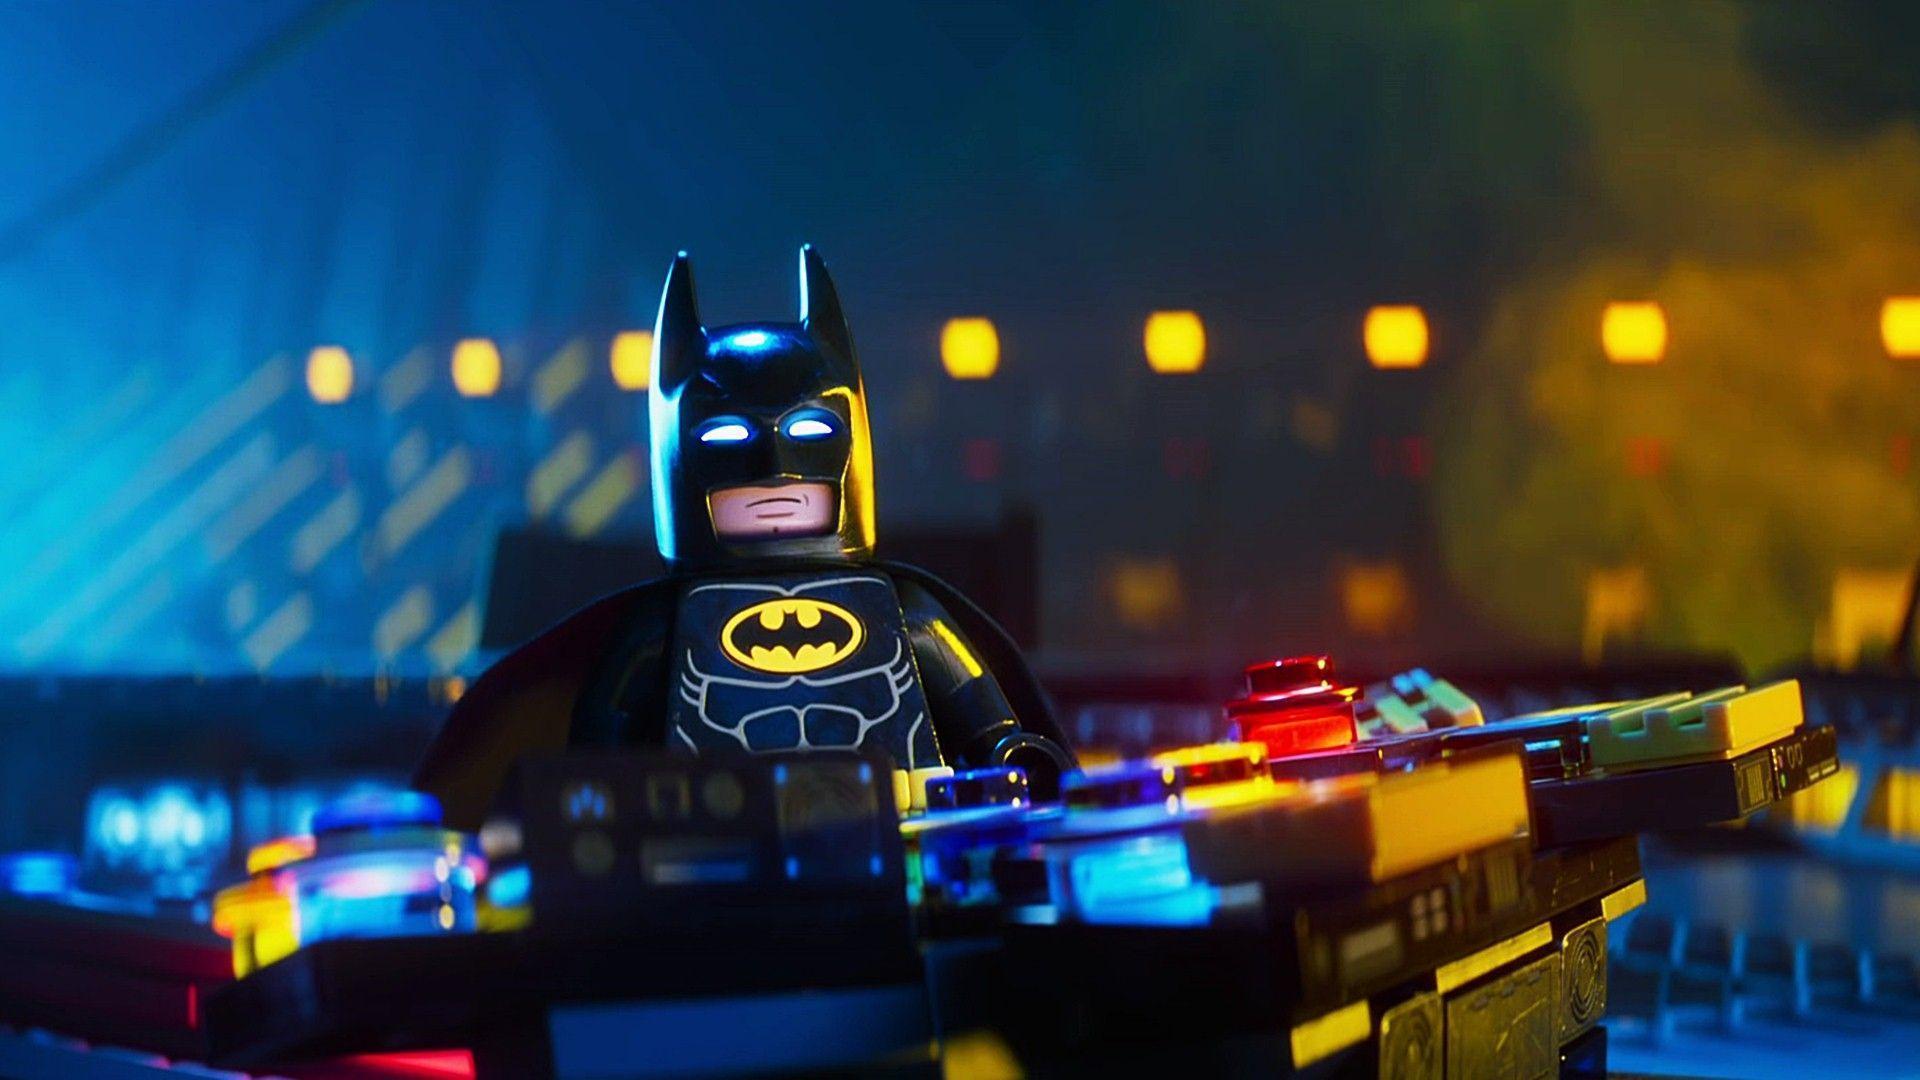 The Lego Batman Movie Wallpapers HD Backgrounds, Image, Pics.